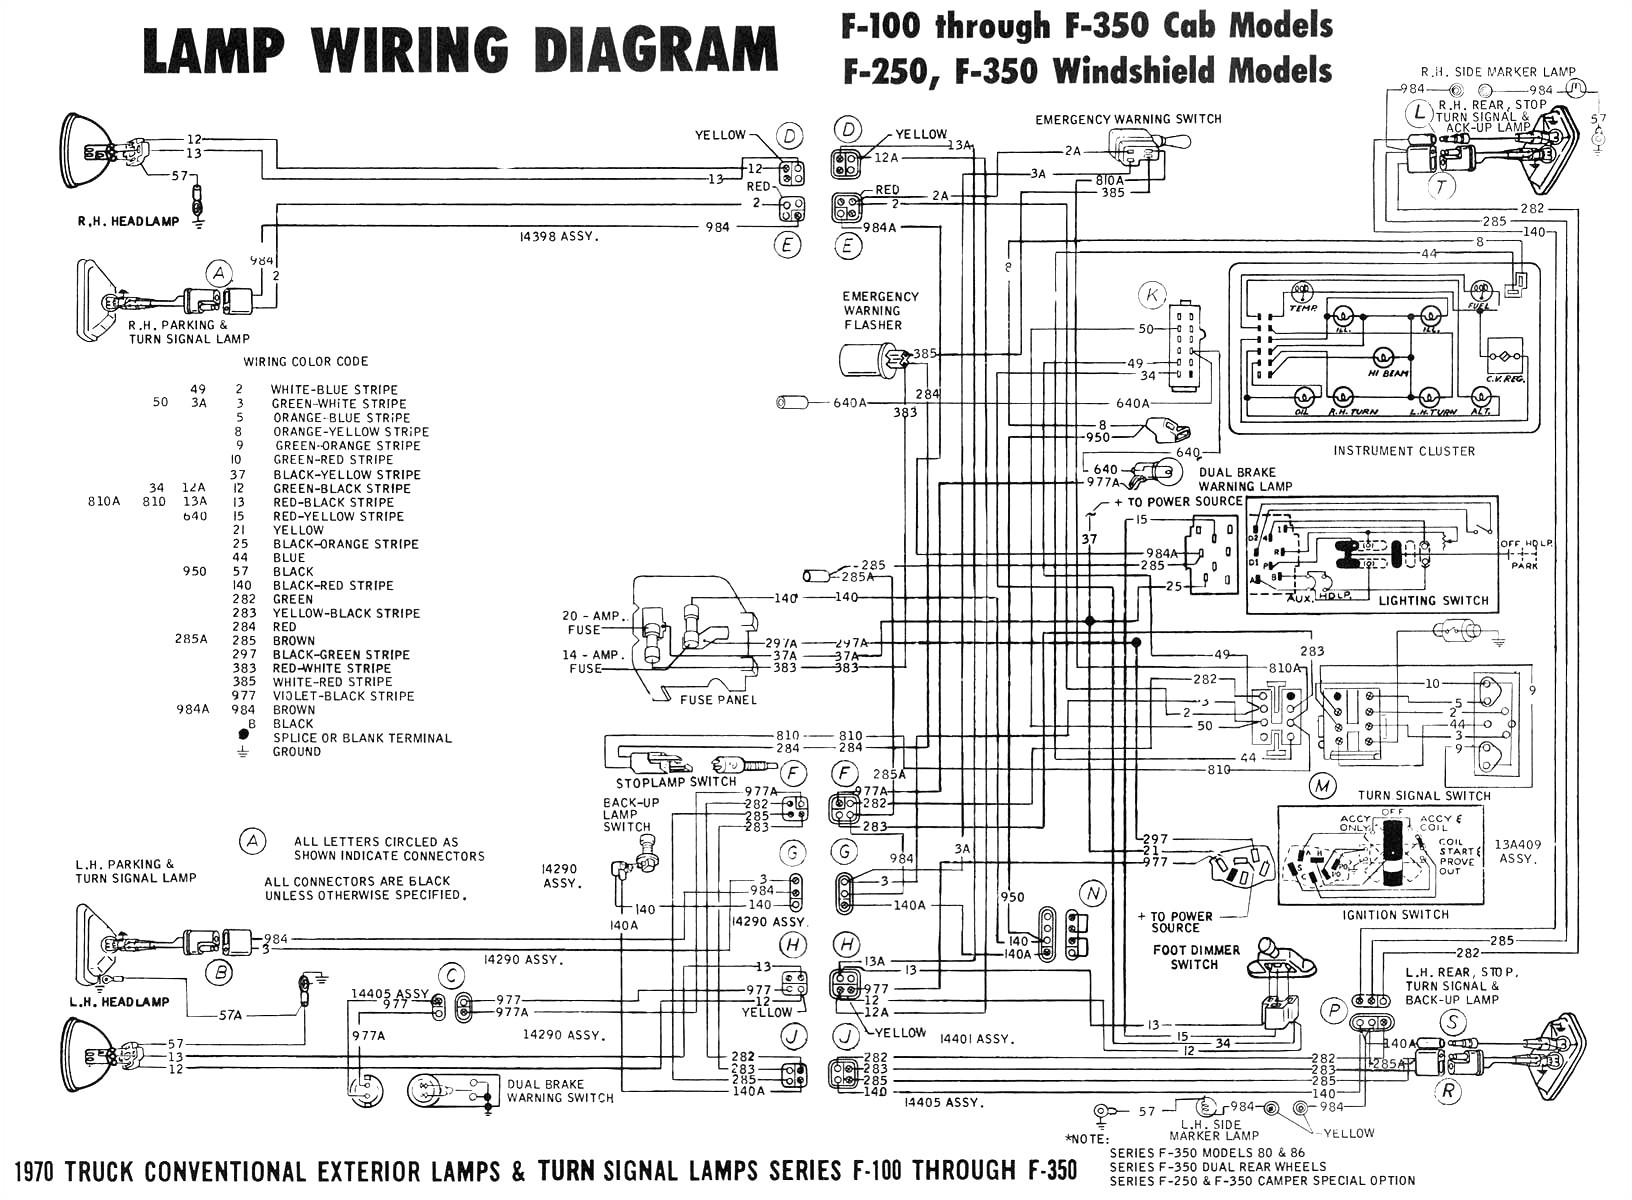 wiring diagram as well as trans am heater control vacuum diagram wiring diagram also trans am heater control vacuum diagram also 1980